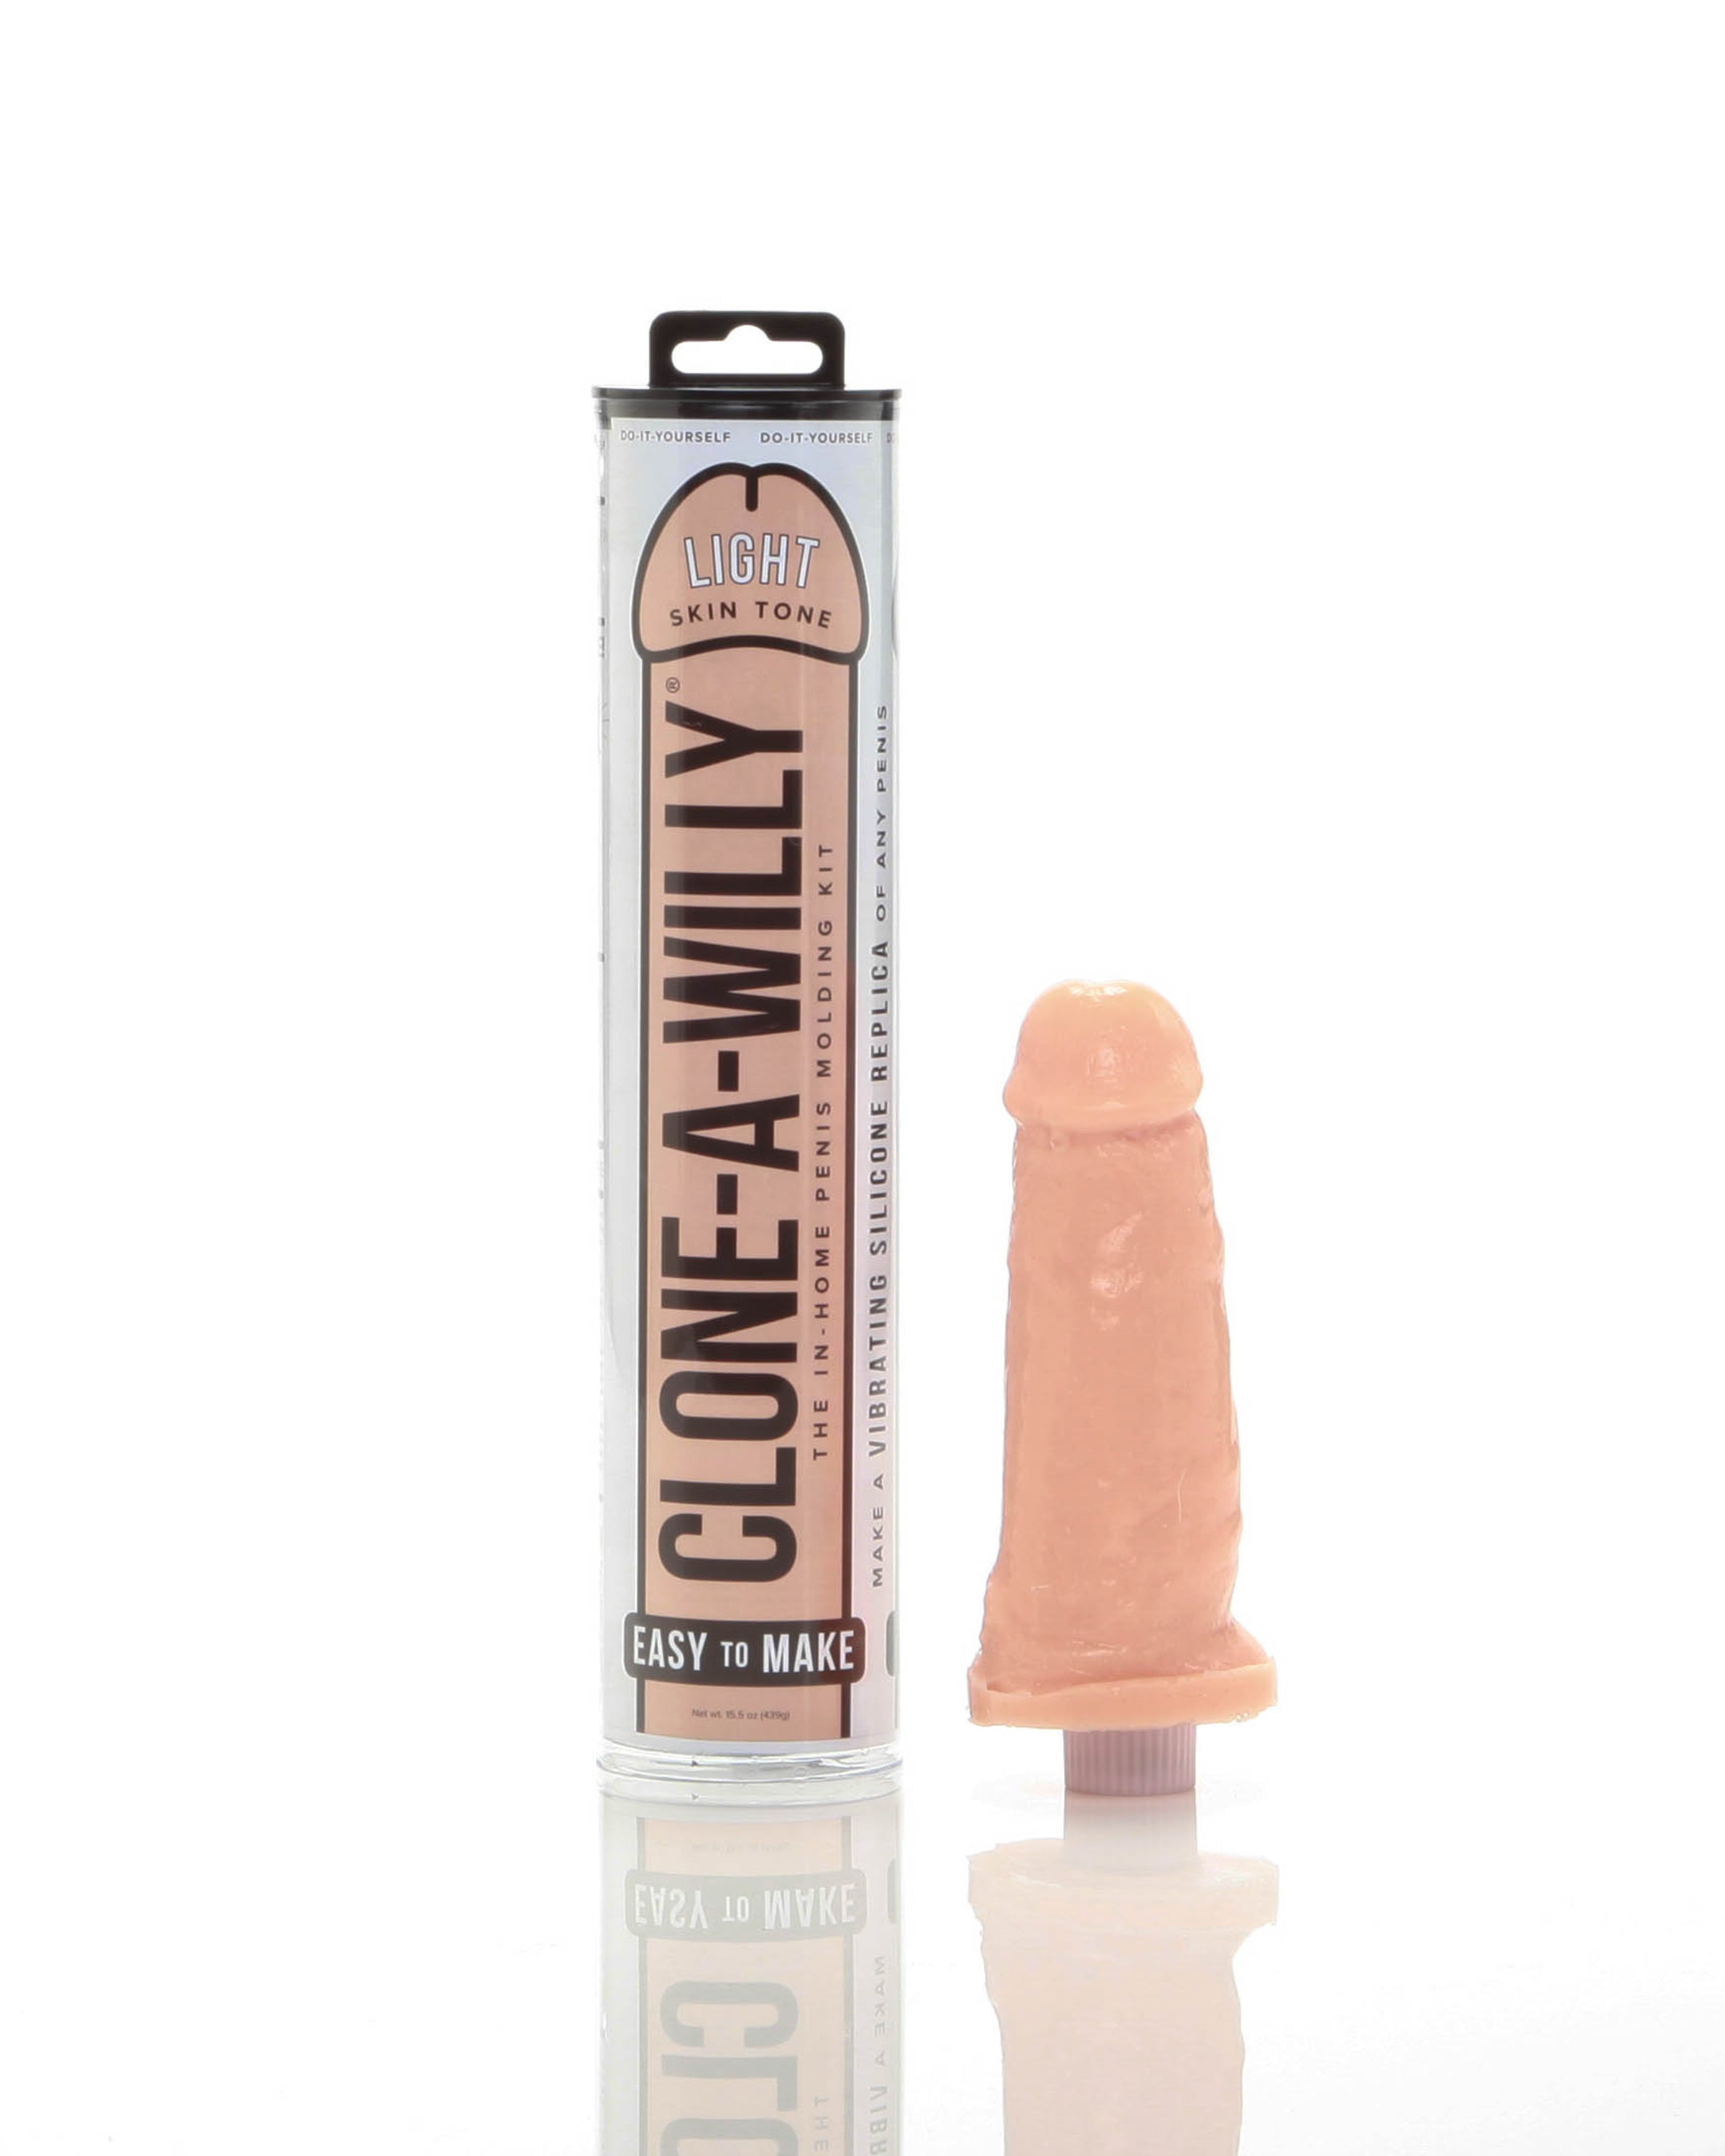 Clone-a-Willy Kit